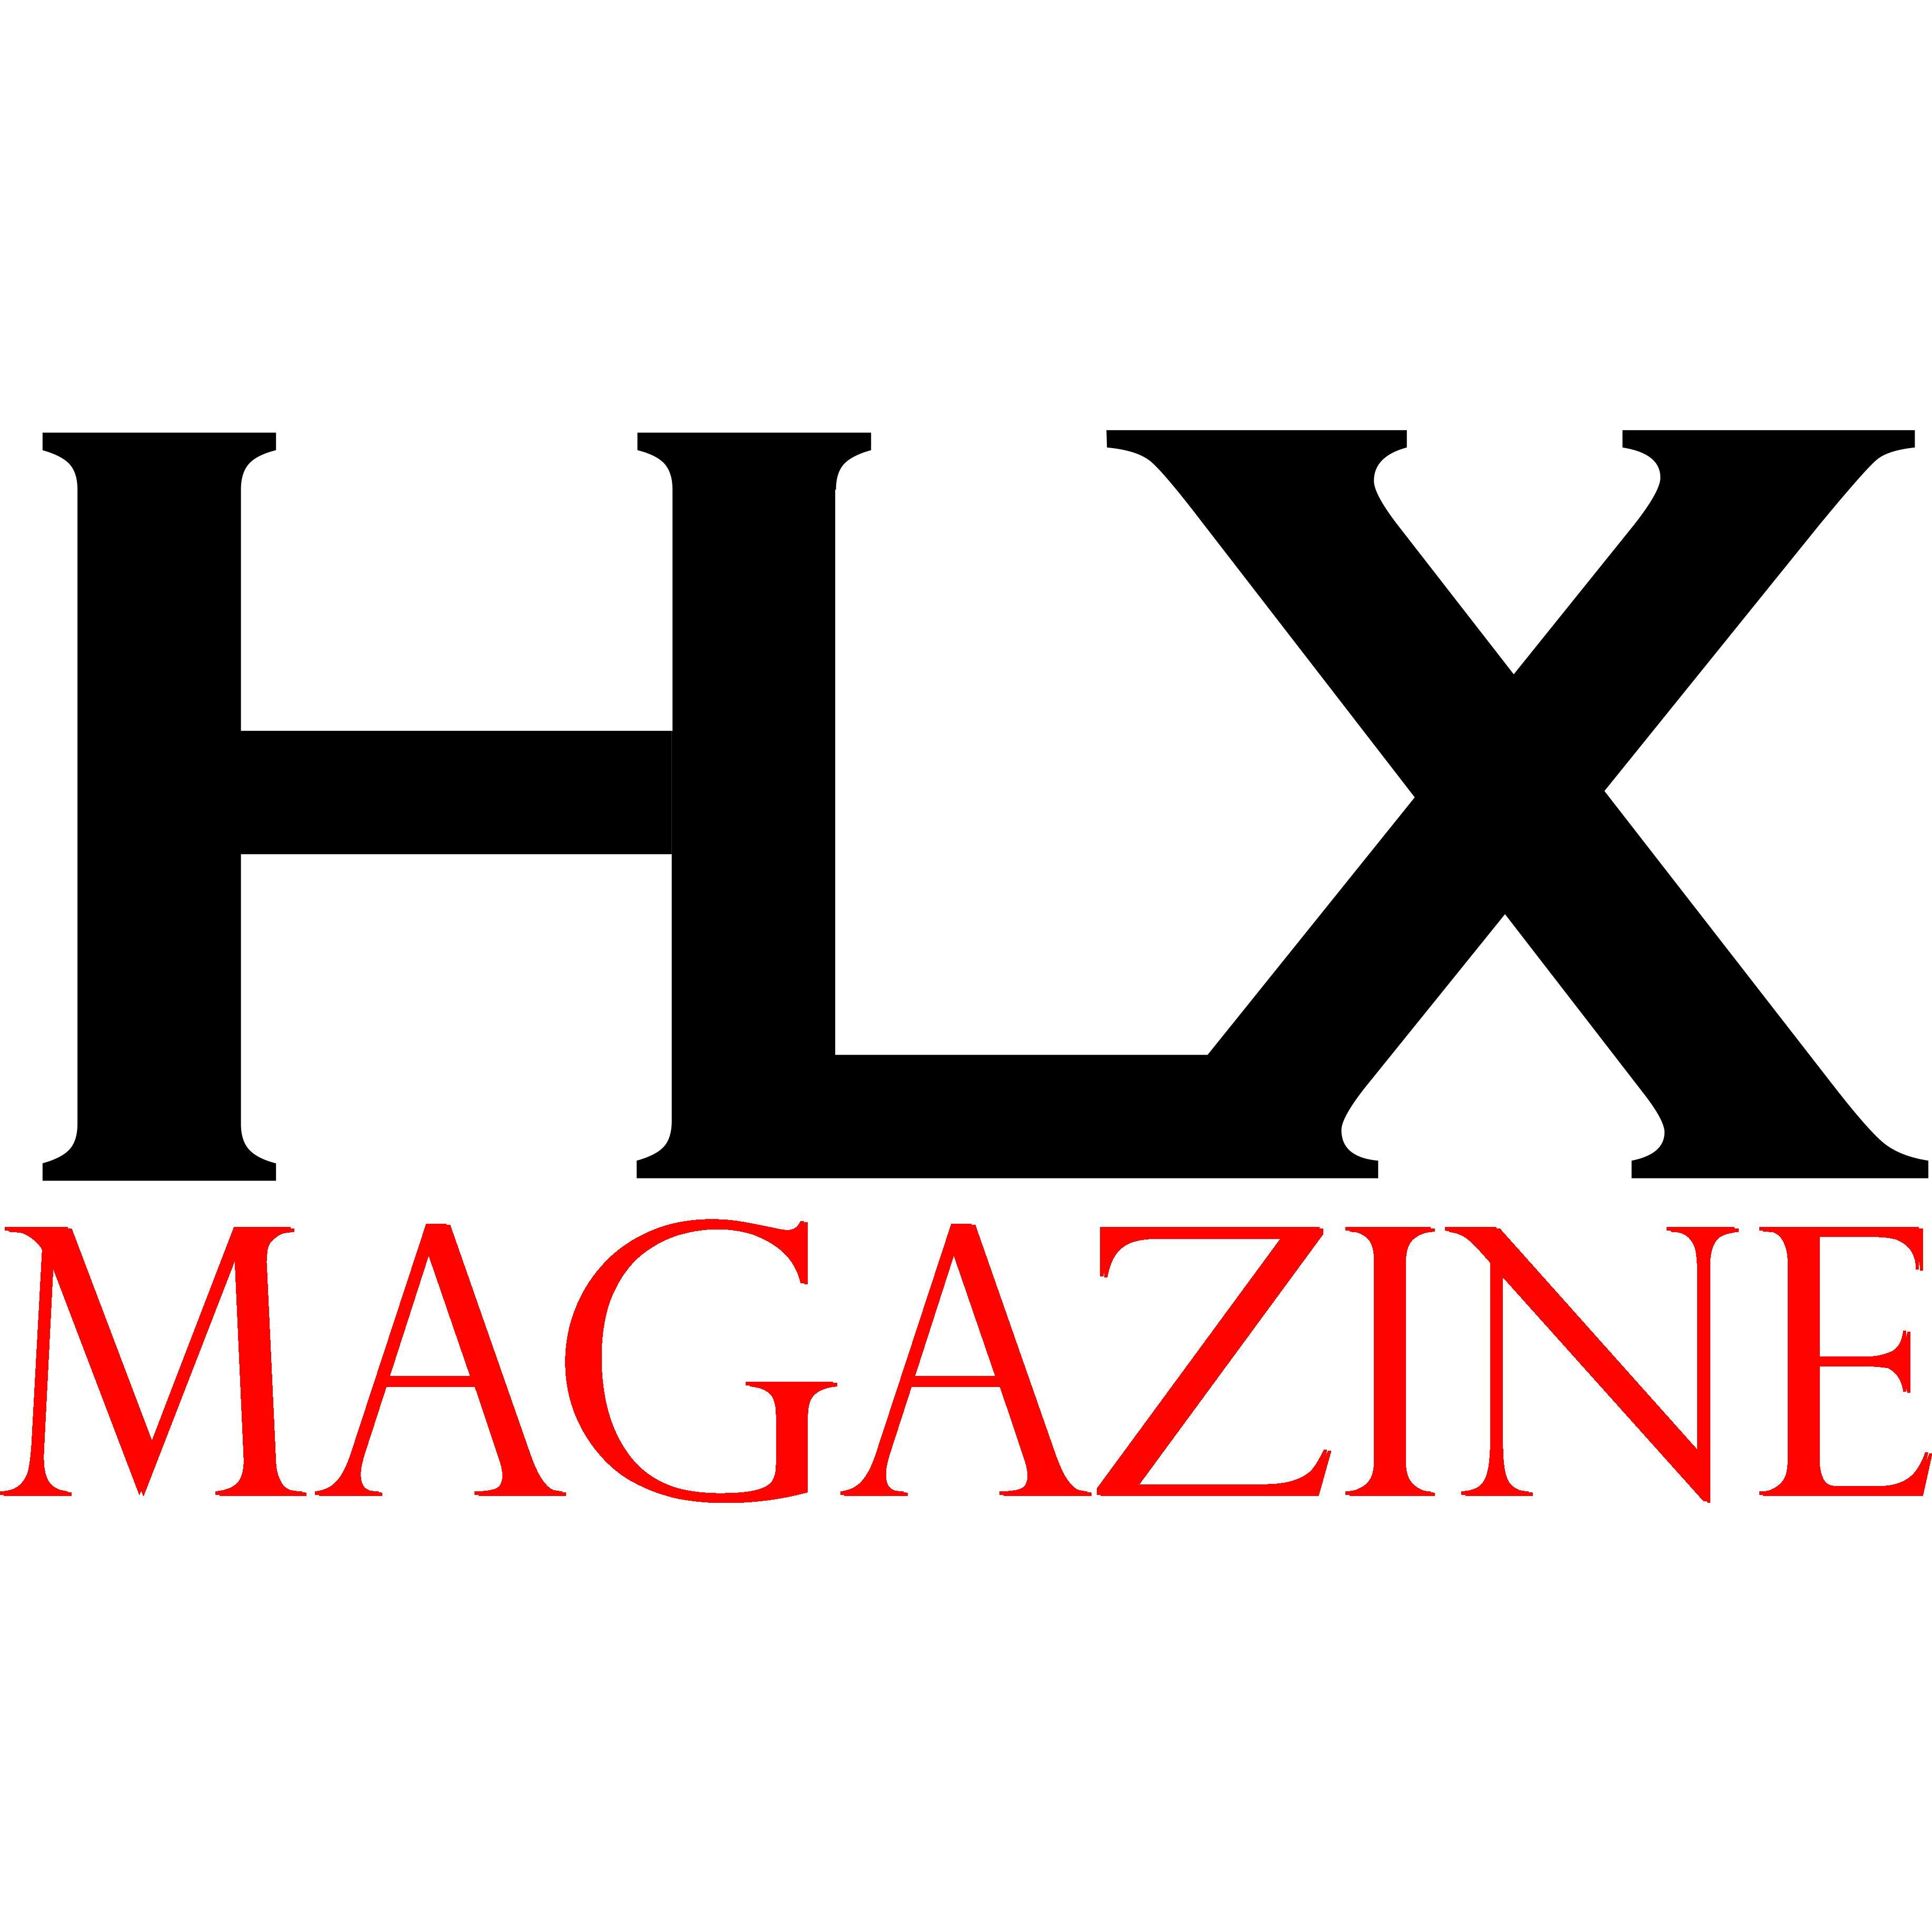 HLX Magazine is an online magazine dedicated to promoting up and coming talent and businesses. To contact us please email us at hlxmag@gmail.com